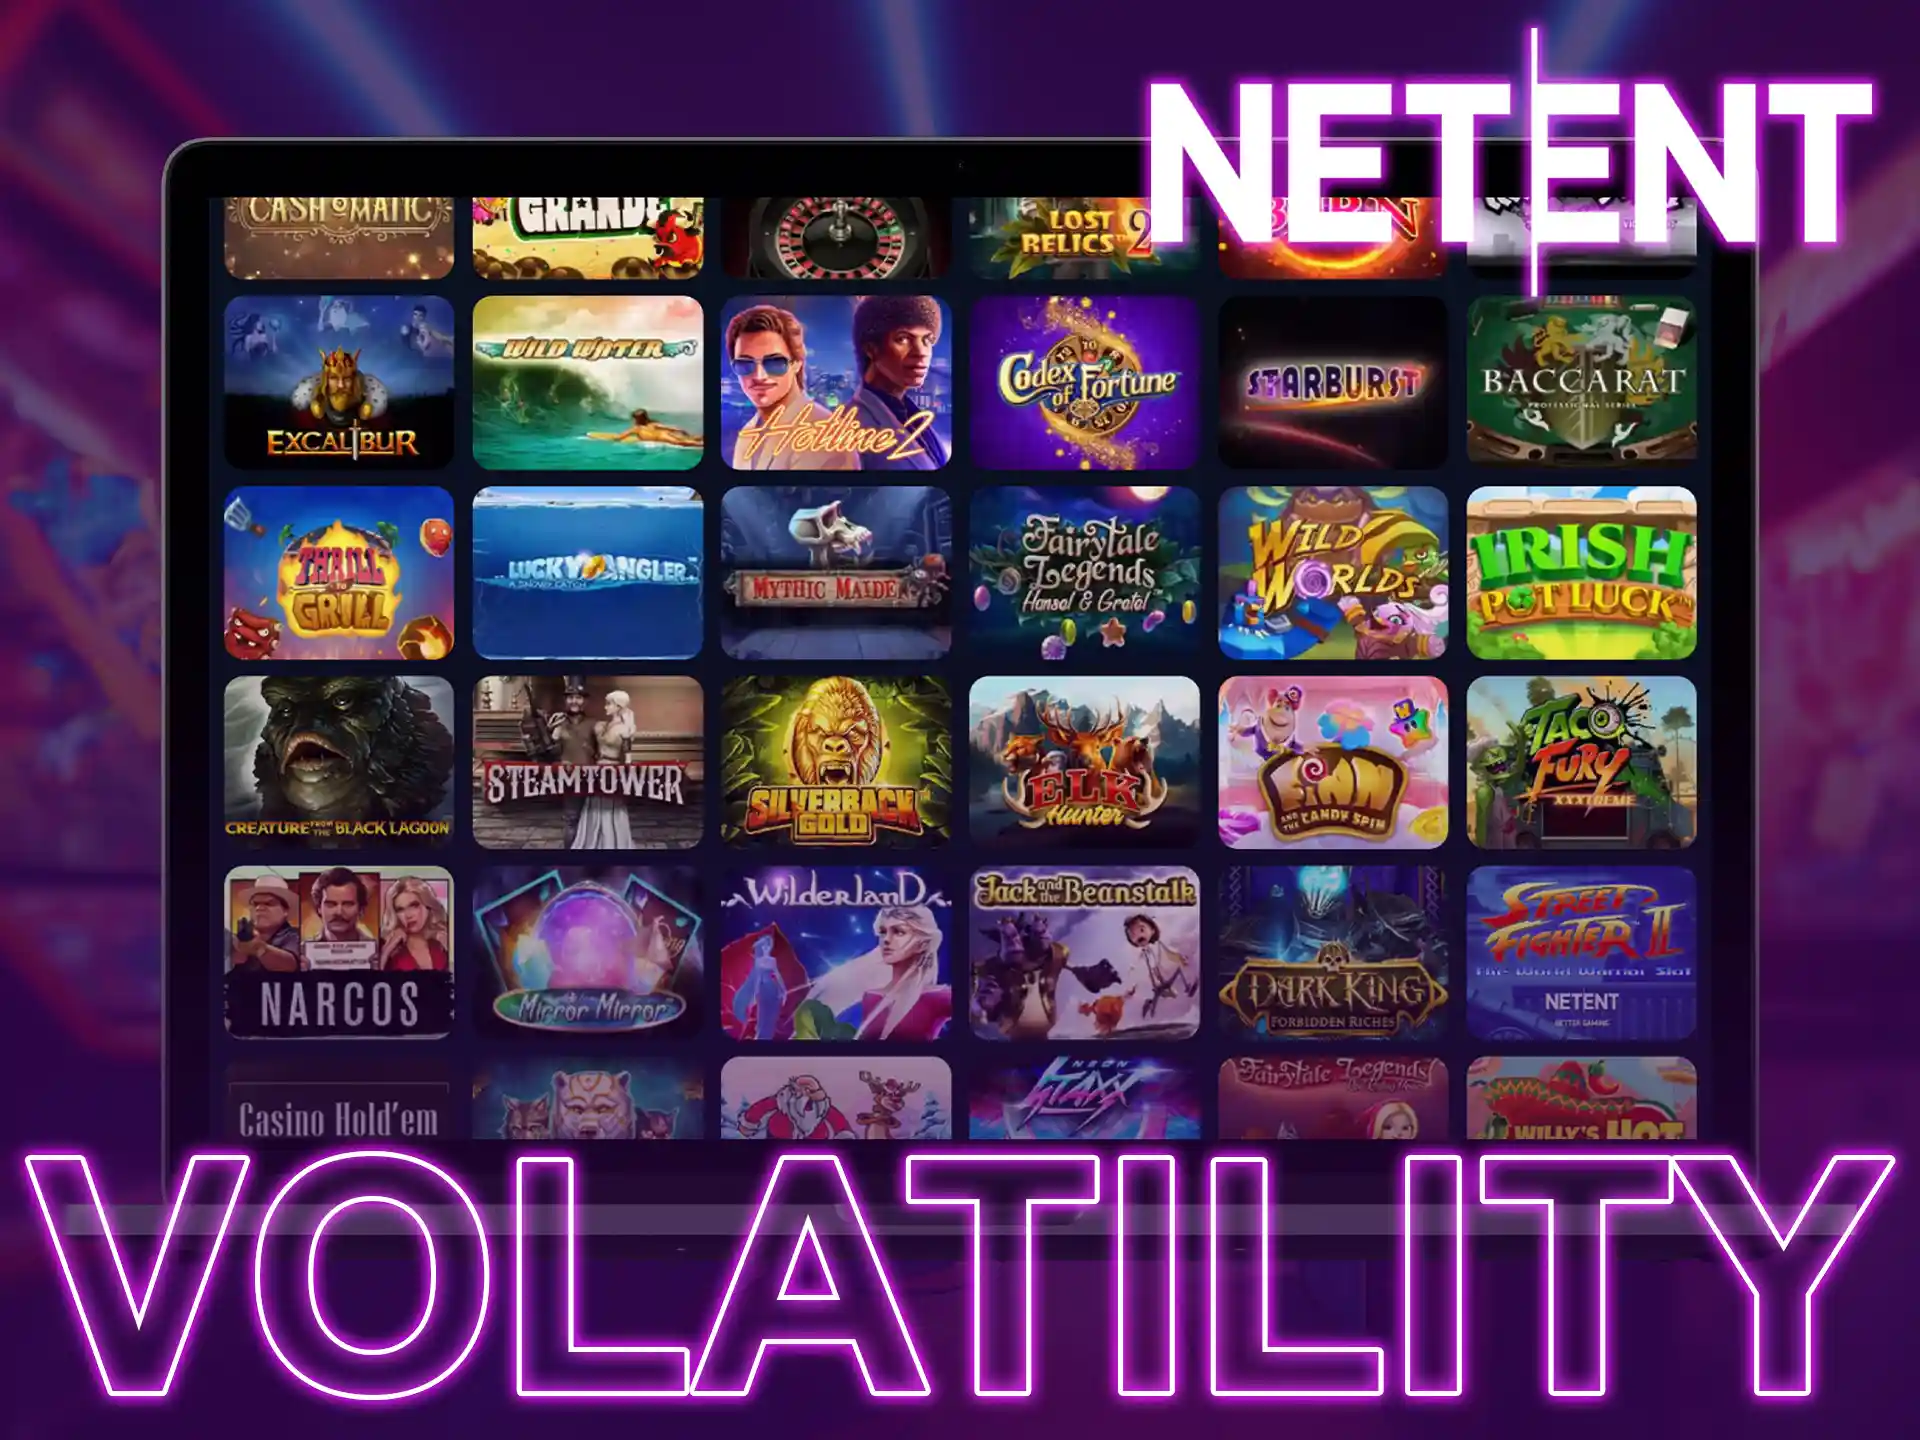 Netent has many slots with high volatility rates.